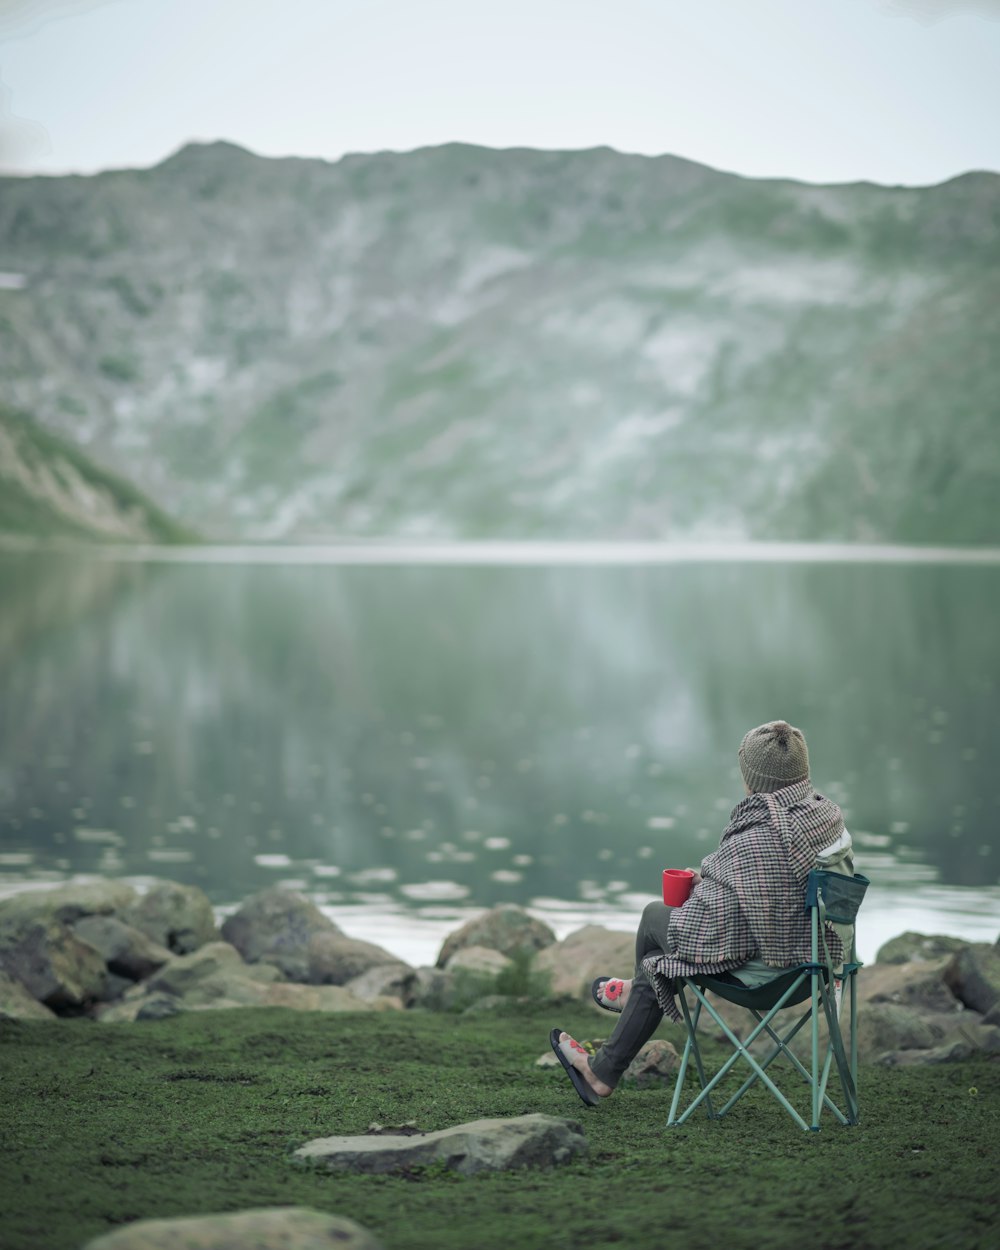 a person sitting in a chair near a body of water